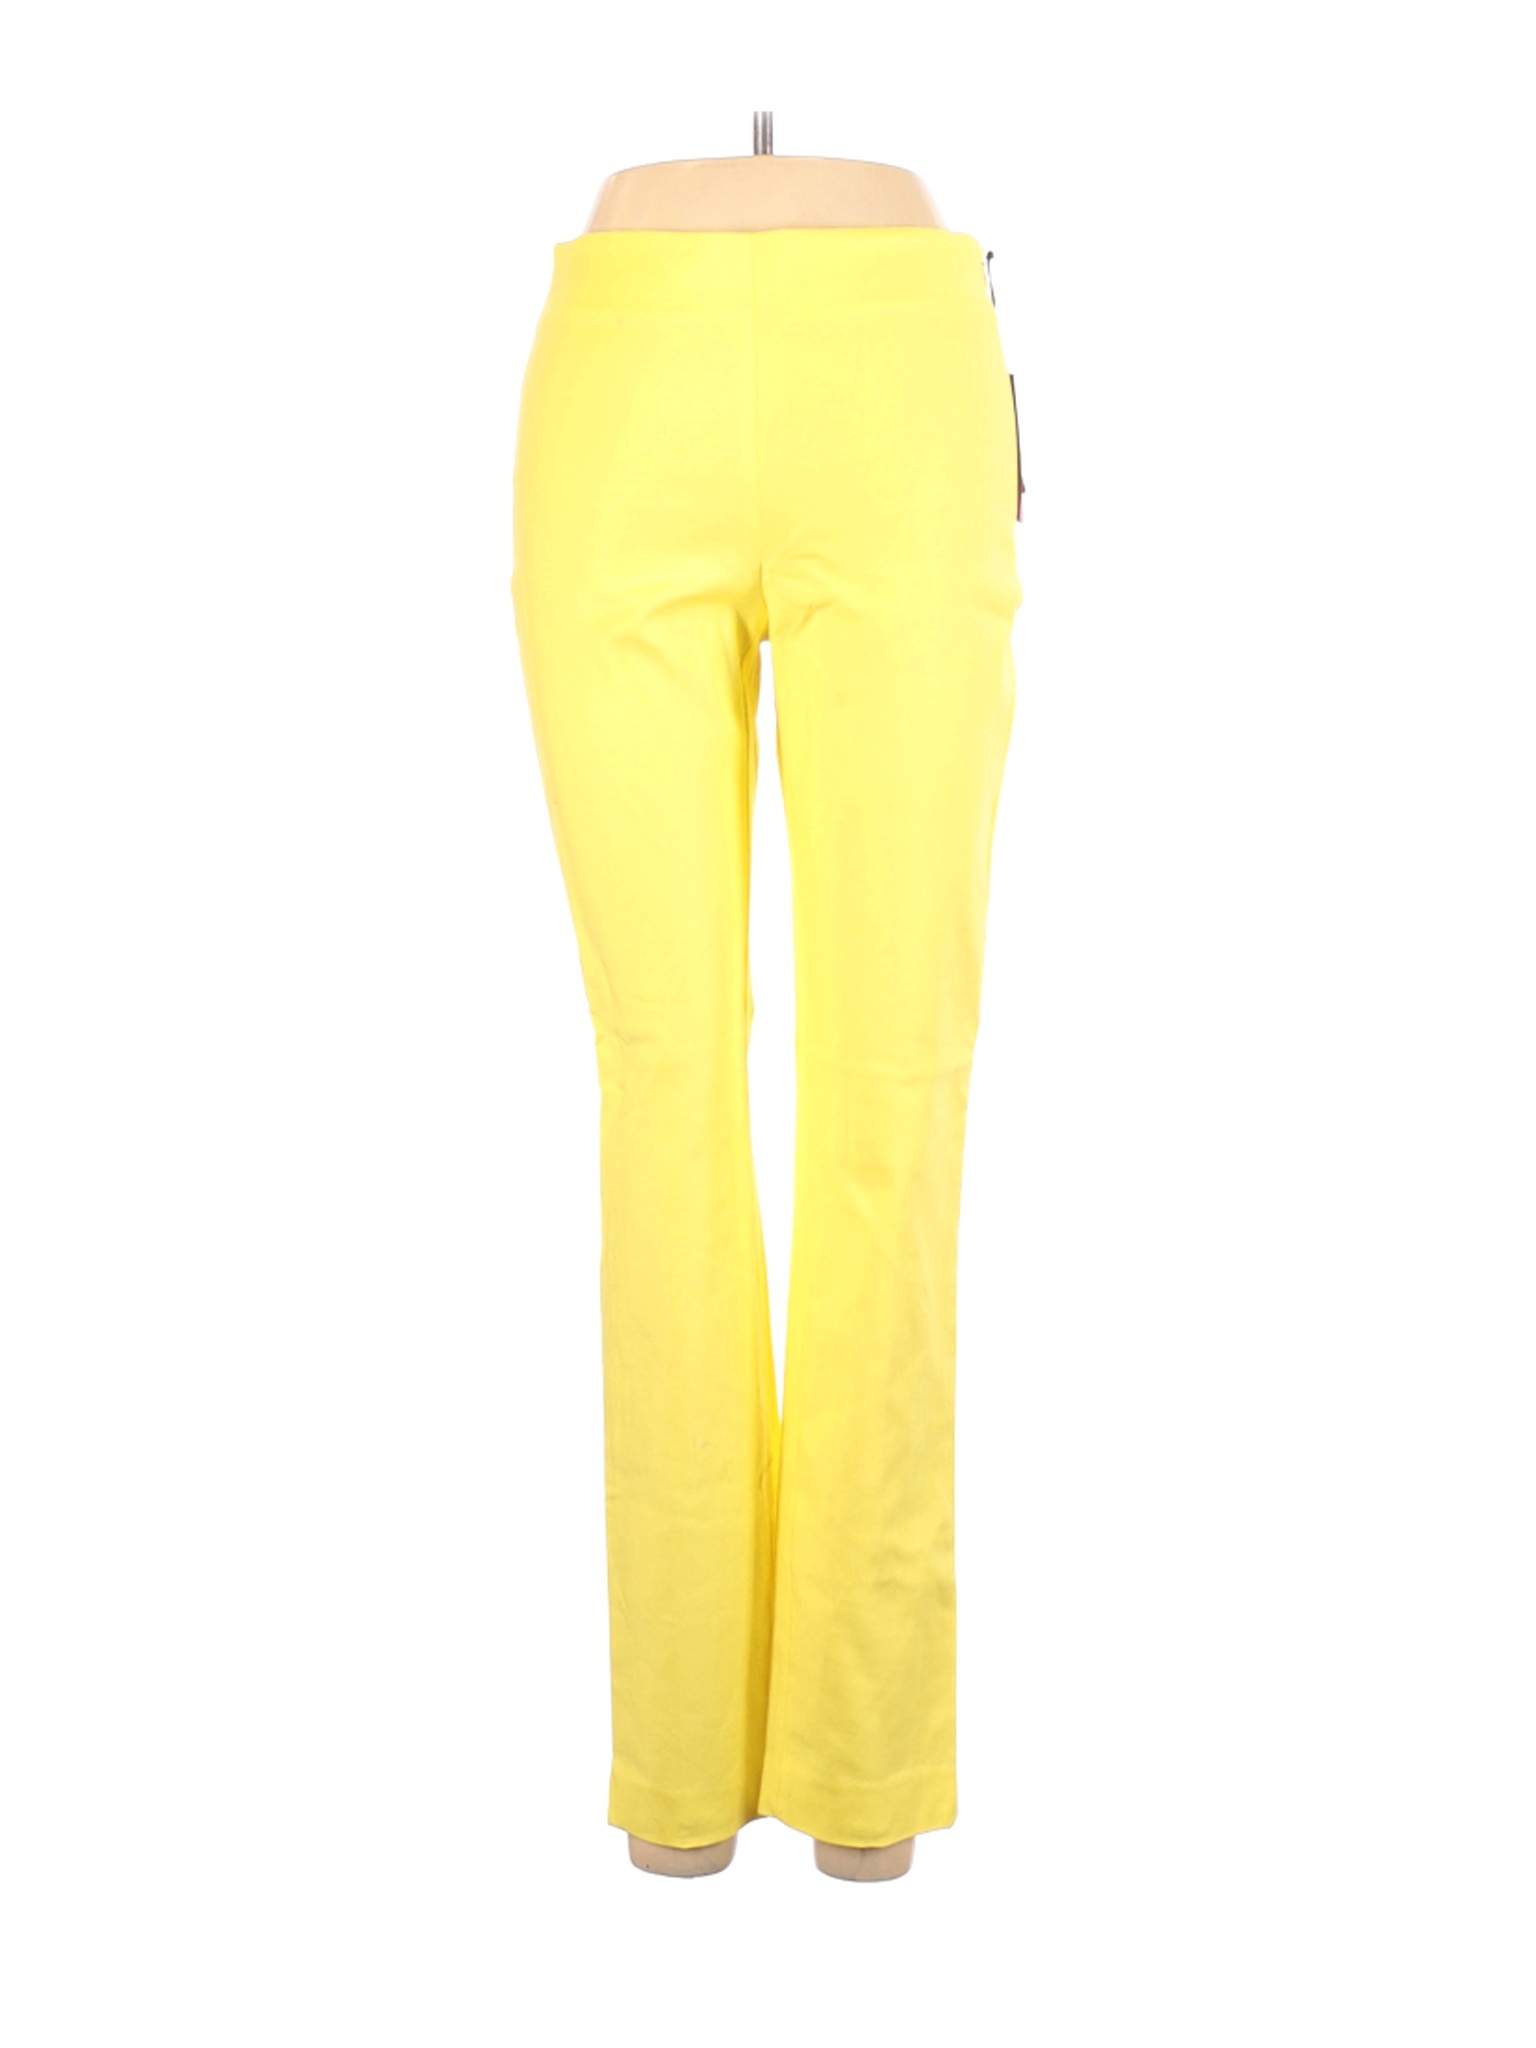 NWT Vince Camuto Women Yellow Casual Pants 0 | eBay